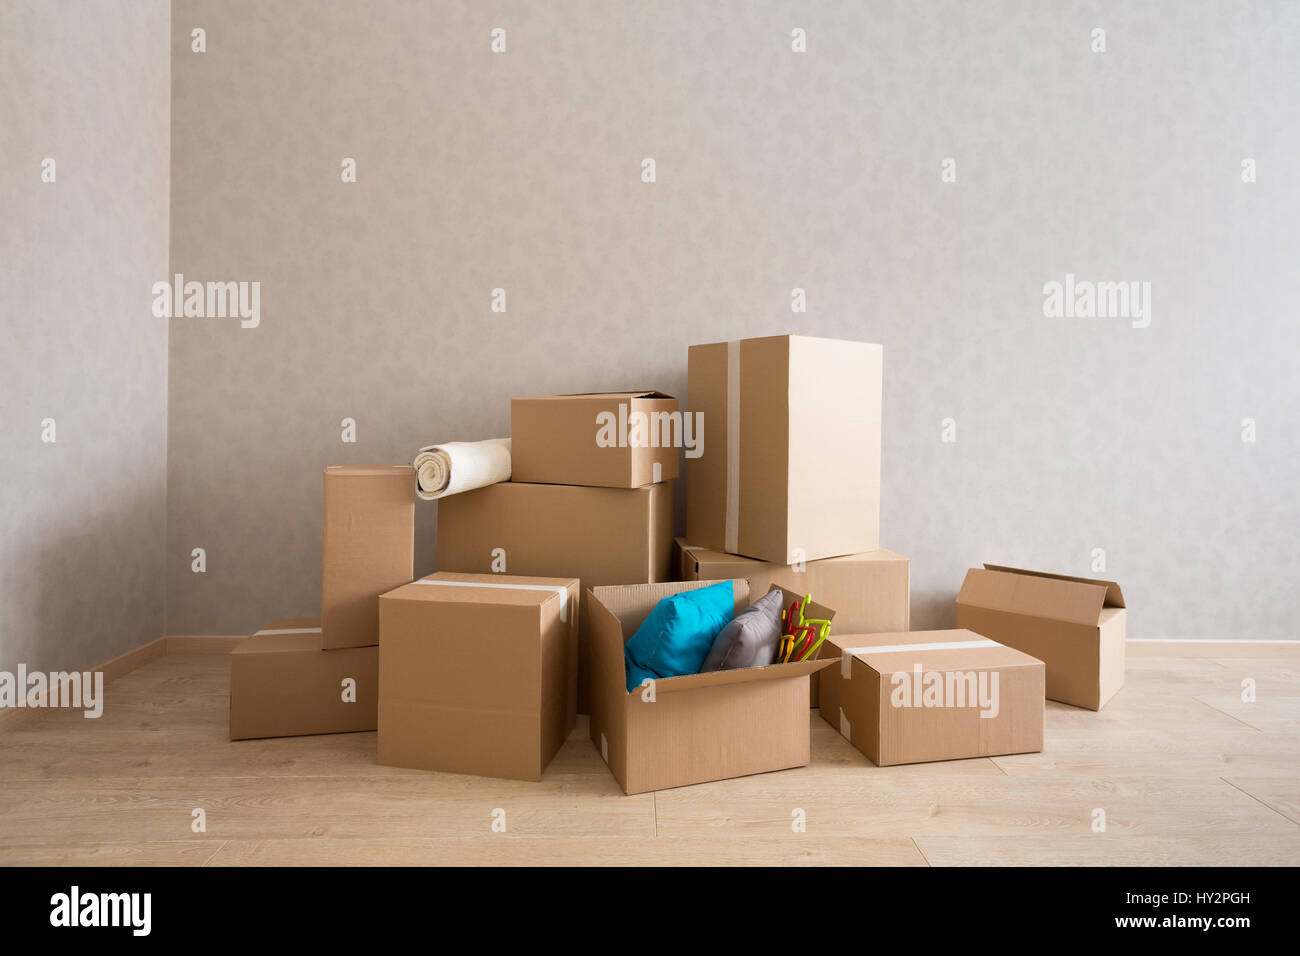 Cardboard boxes in new empty room Stock Photo